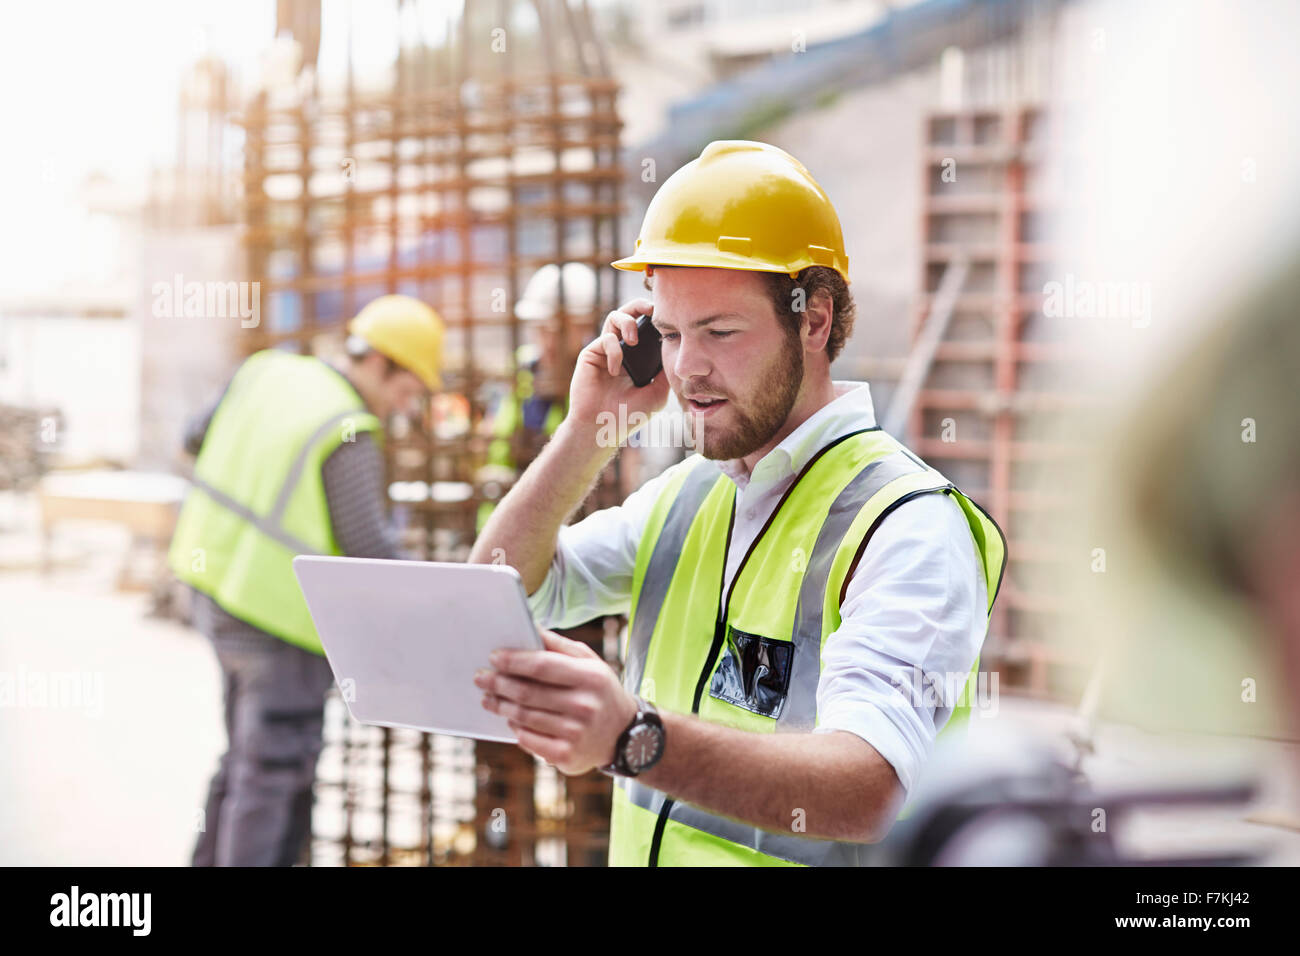 Engineer with digital tablet talking on cell phone at construction site Banque D'Images